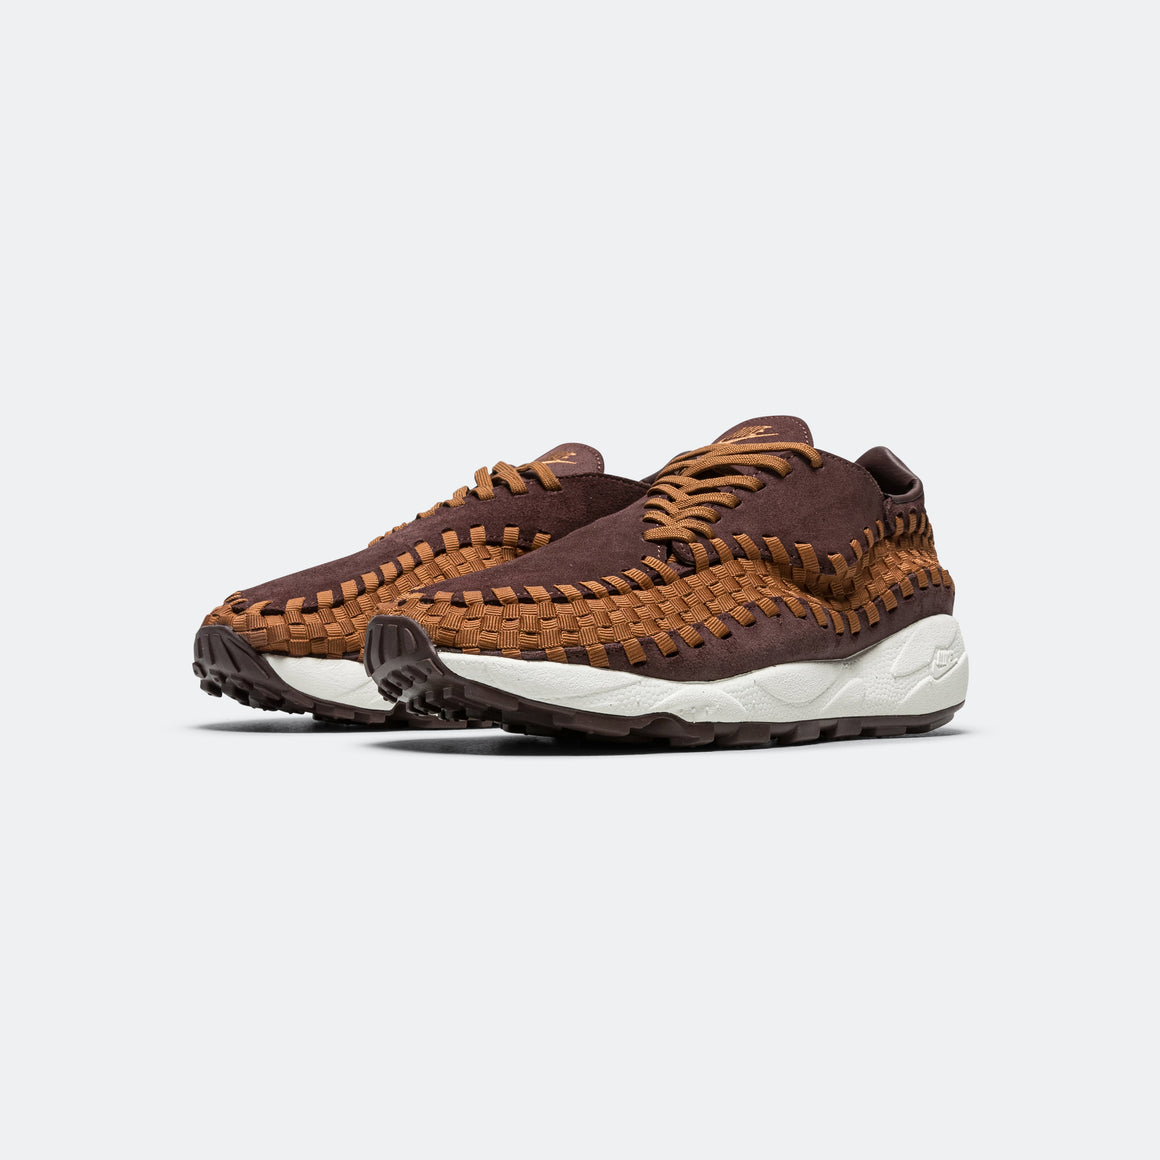 Nike - Womens Air Footscape Woven - Earth/Lt British Tan-Phantom - UP THERE